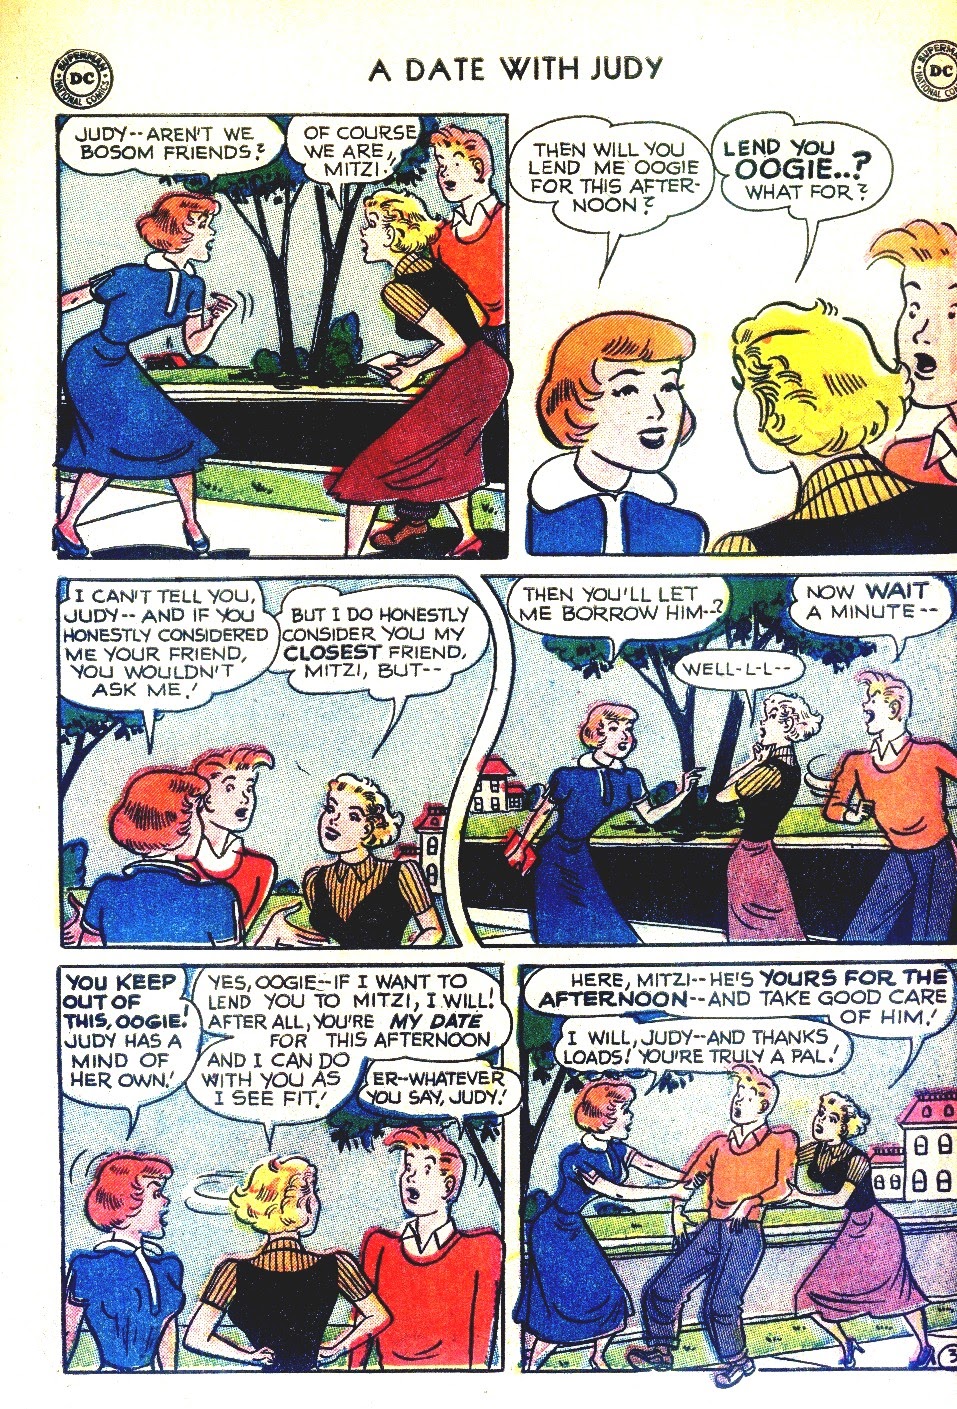 Read online A Date with Judy comic -  Issue #39 - 35